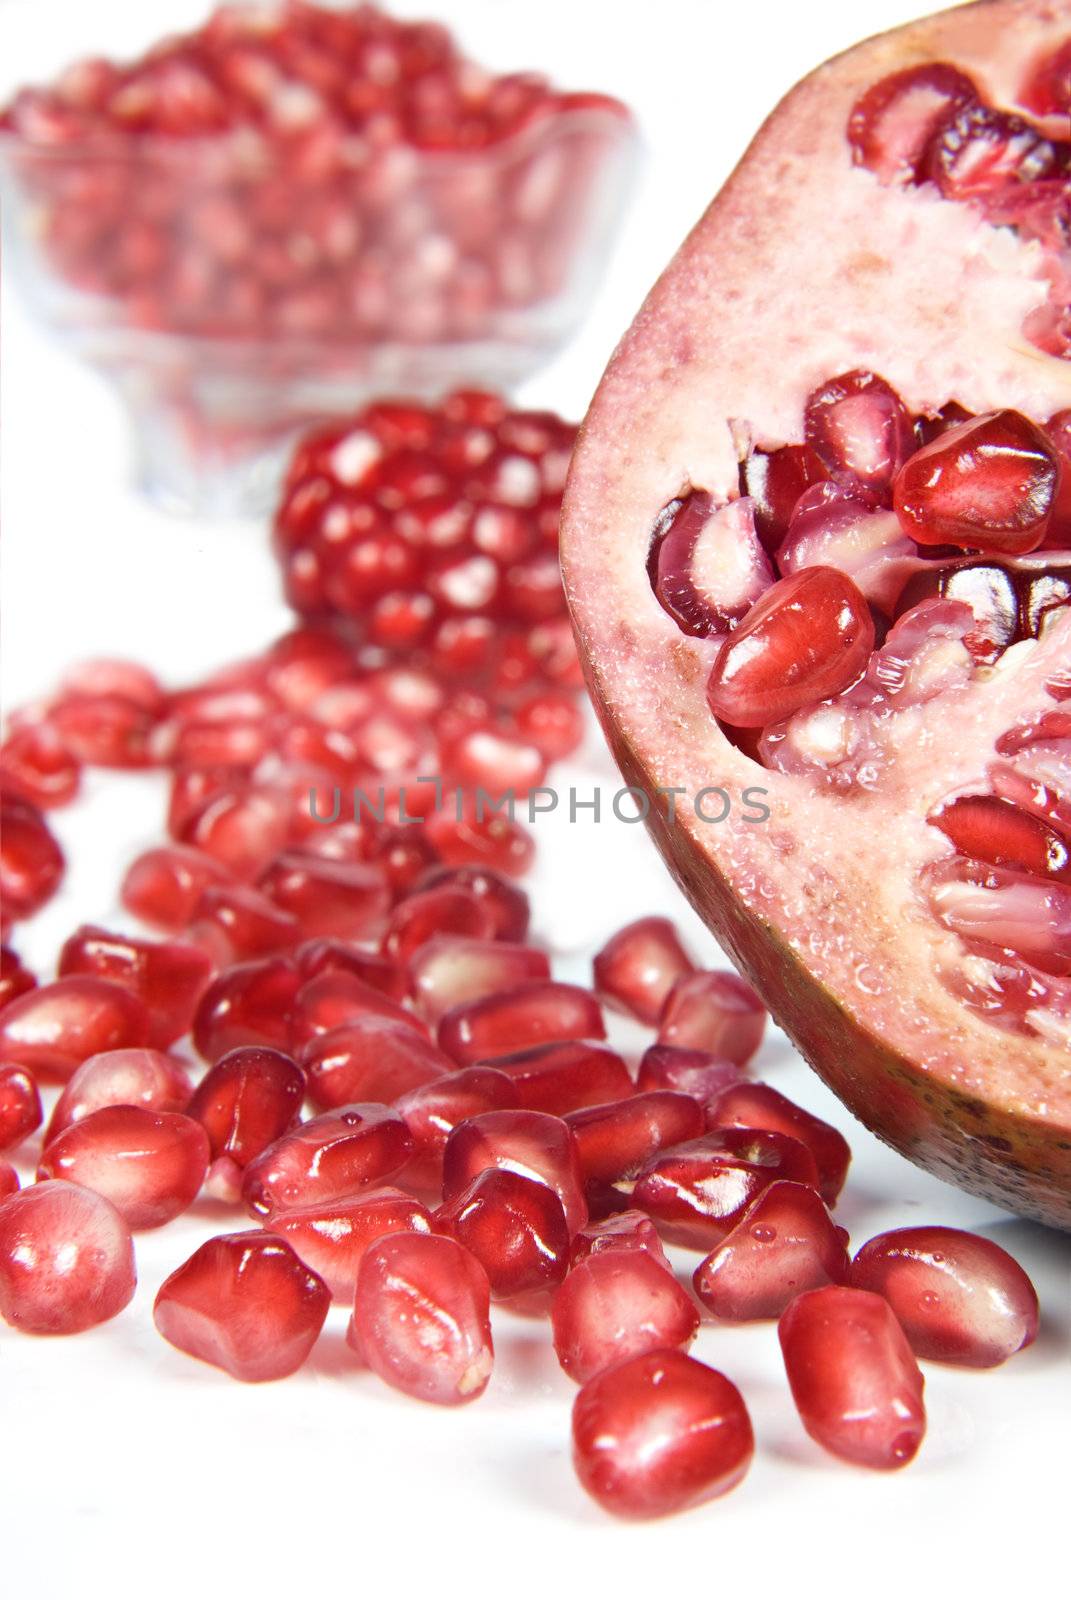 Pomegranate fruit and pipps by tish1